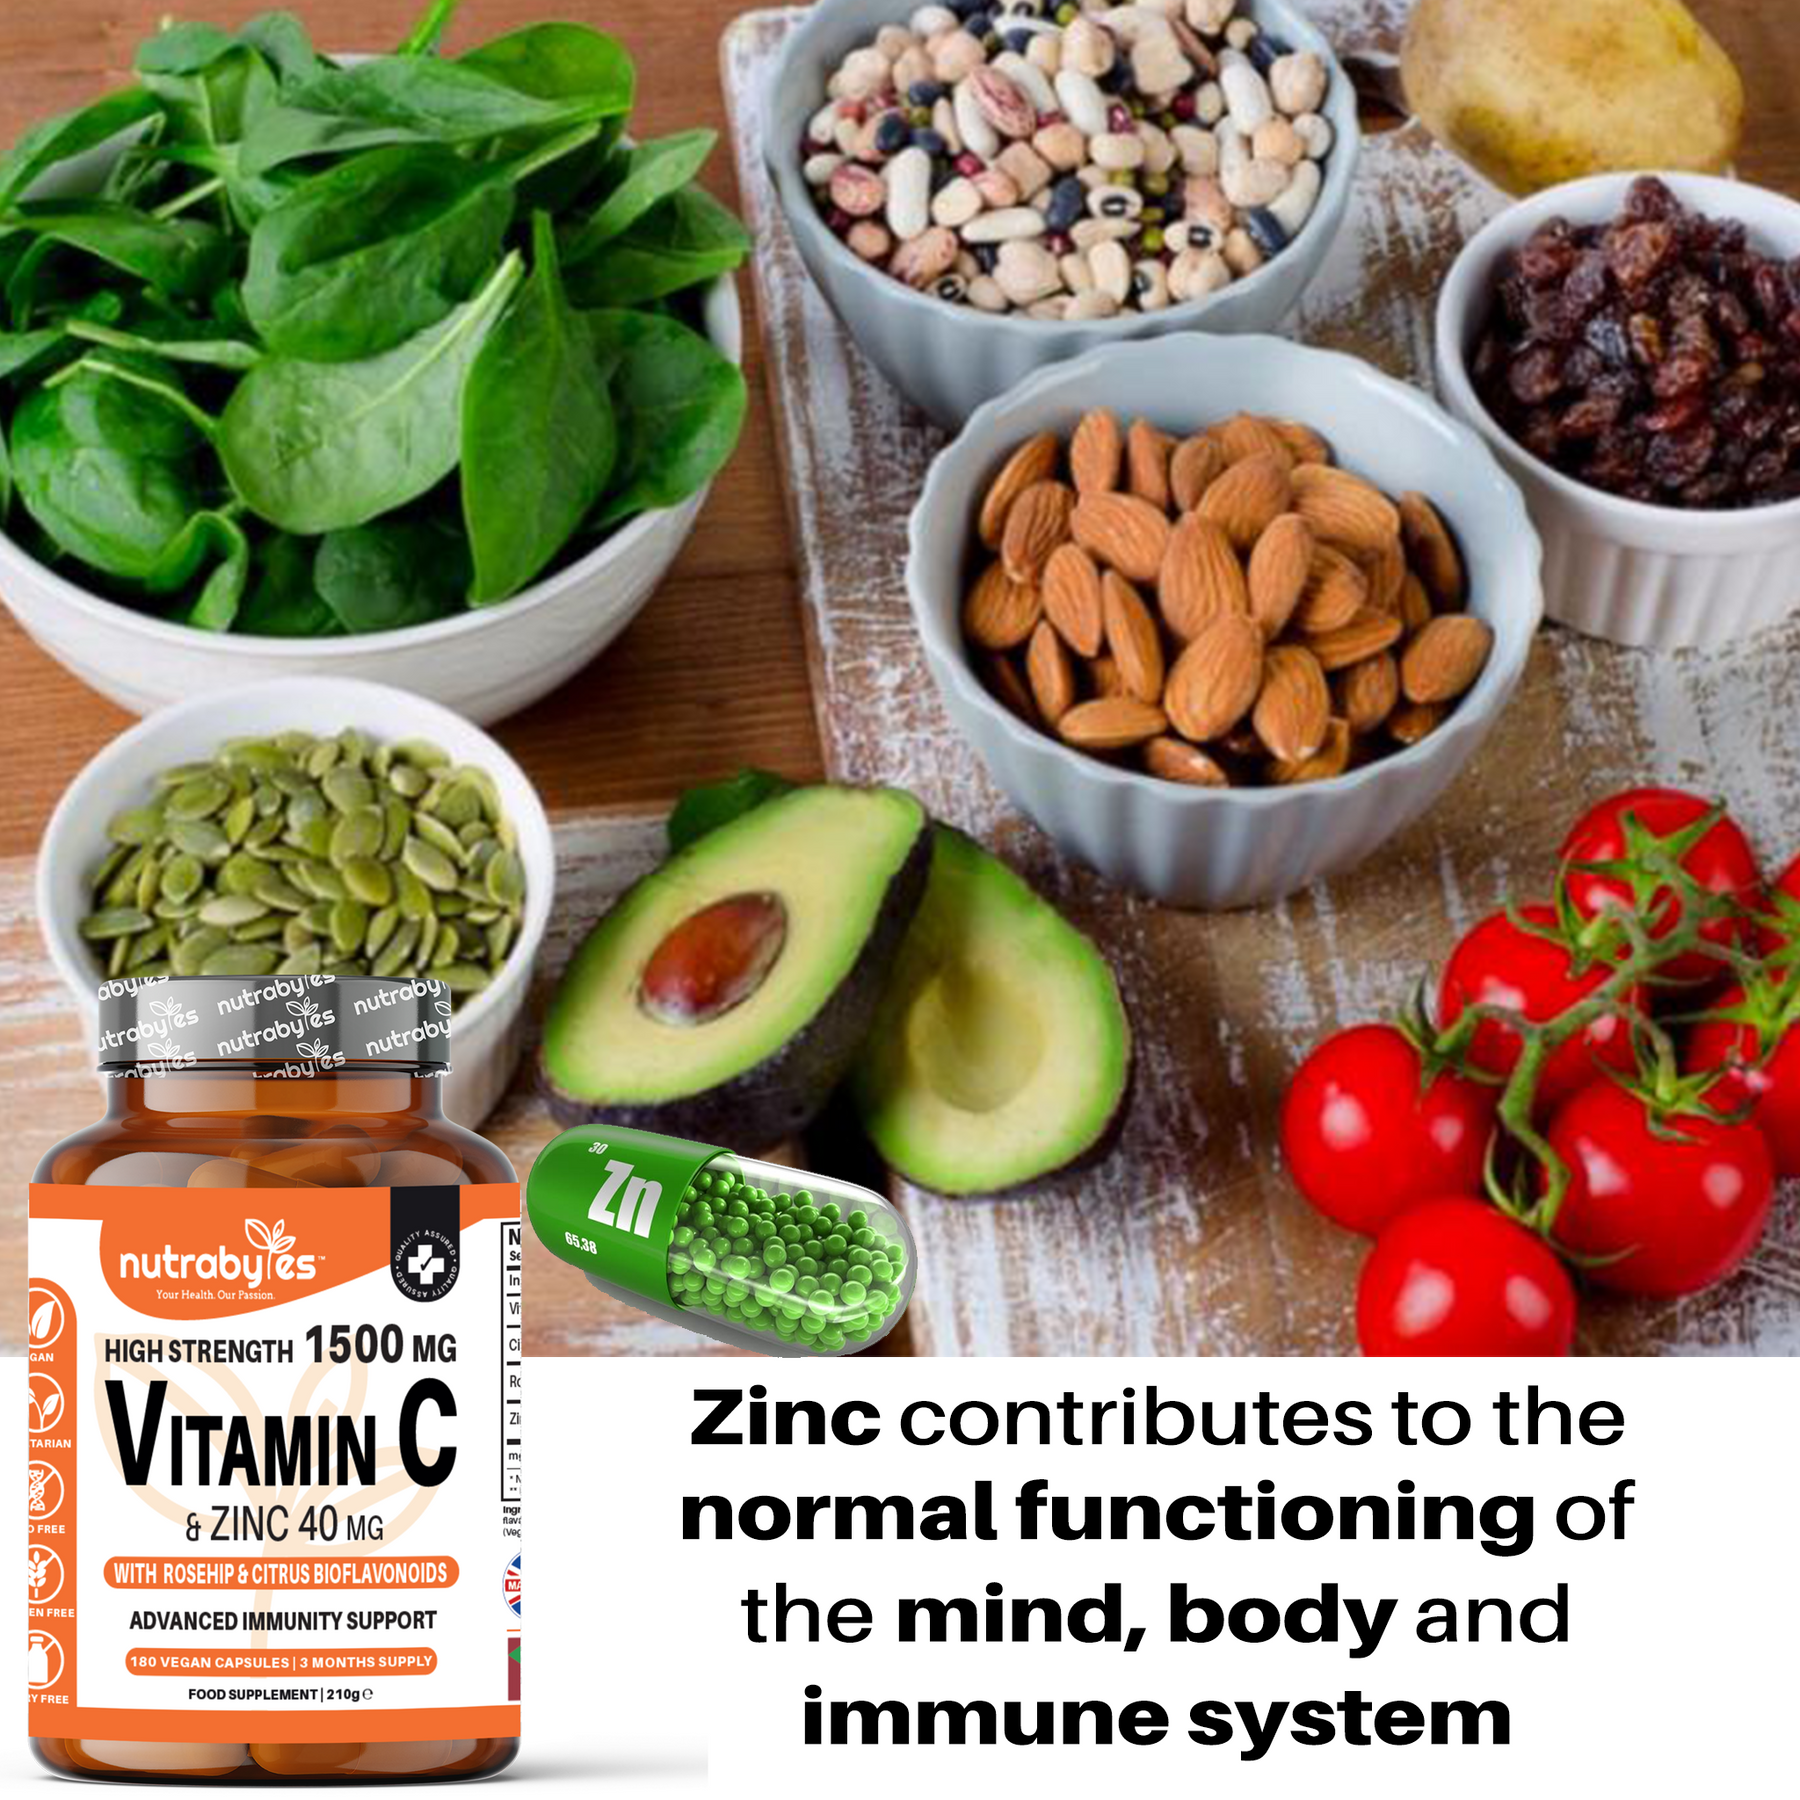 High Strength Vitamin C with Zinc High Strength Vegan Capsules (Advanced Immunity Support) | 3 Months Supply | Made in the UK